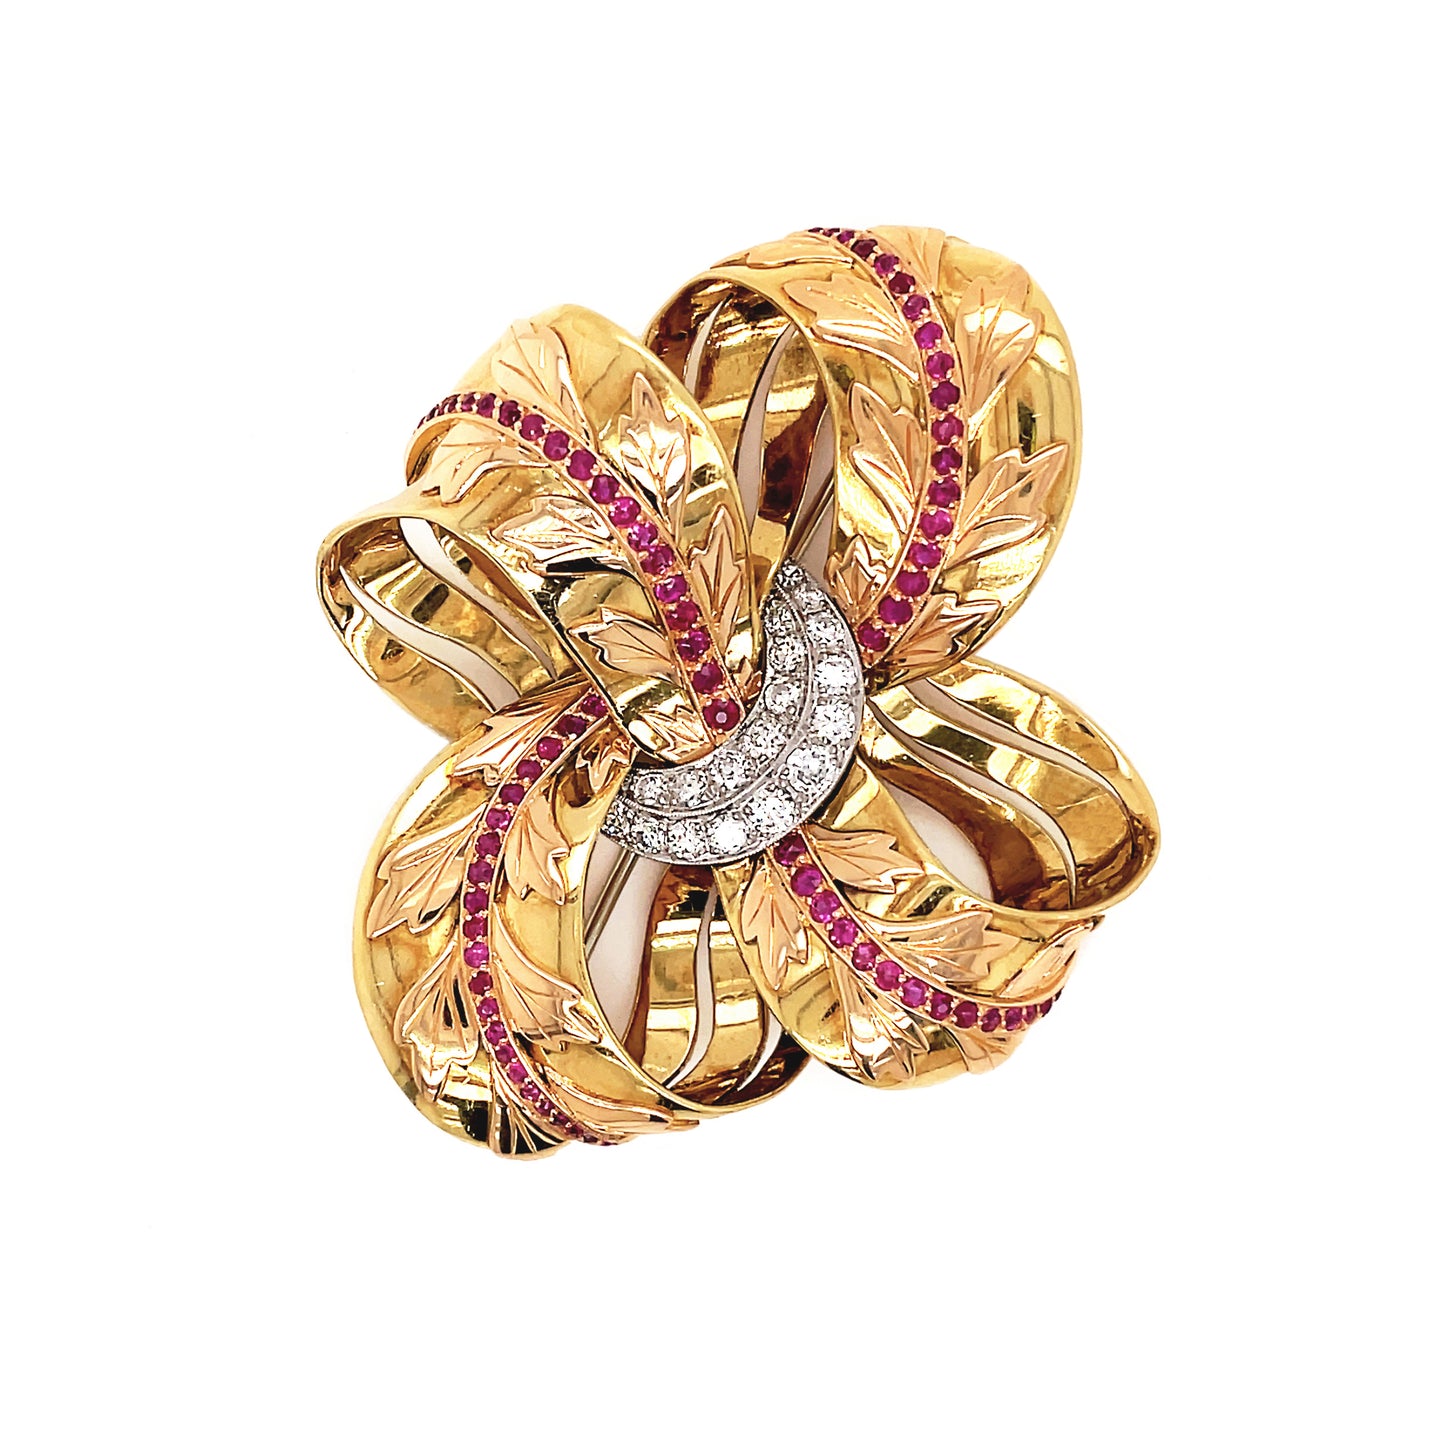 Vintage 18ct Gold Diamond and Ruby Floral Ribbon Brooch, circa 1950's